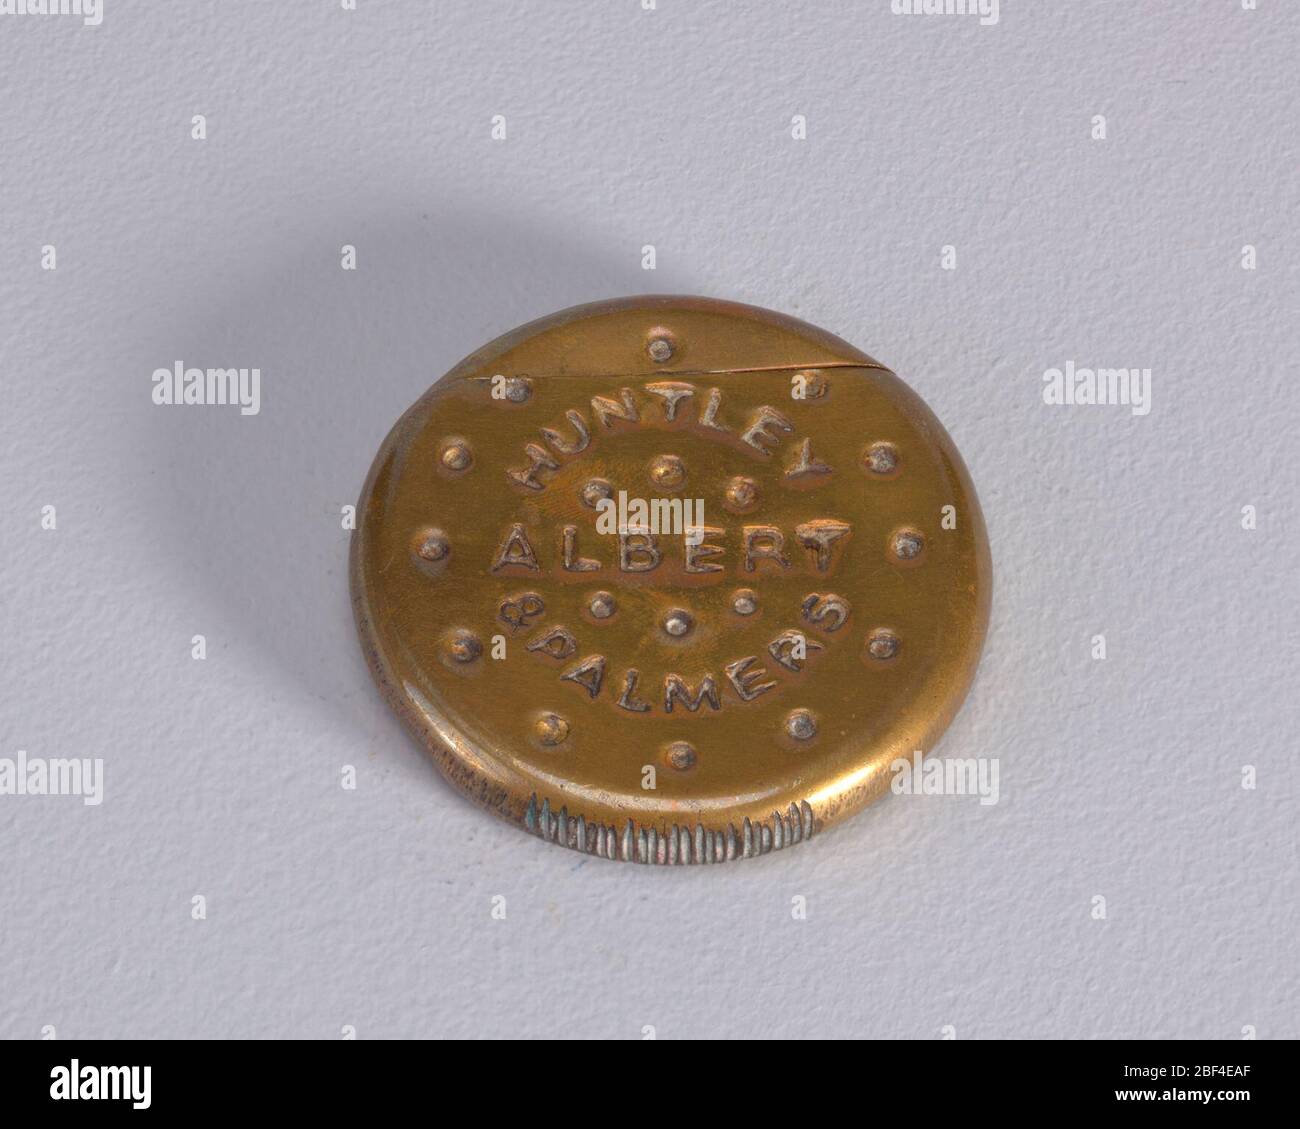 Huntley Palmers Albert Biscuit. Circular, in the form of a biscuit, with small, dot-like, simulated perforations on front surface, inscribed 'Huntley & Palmers,' 'Albert.' On reverse are small, vertical and horizontal, dash-like, simulated perforations. Stock Photo